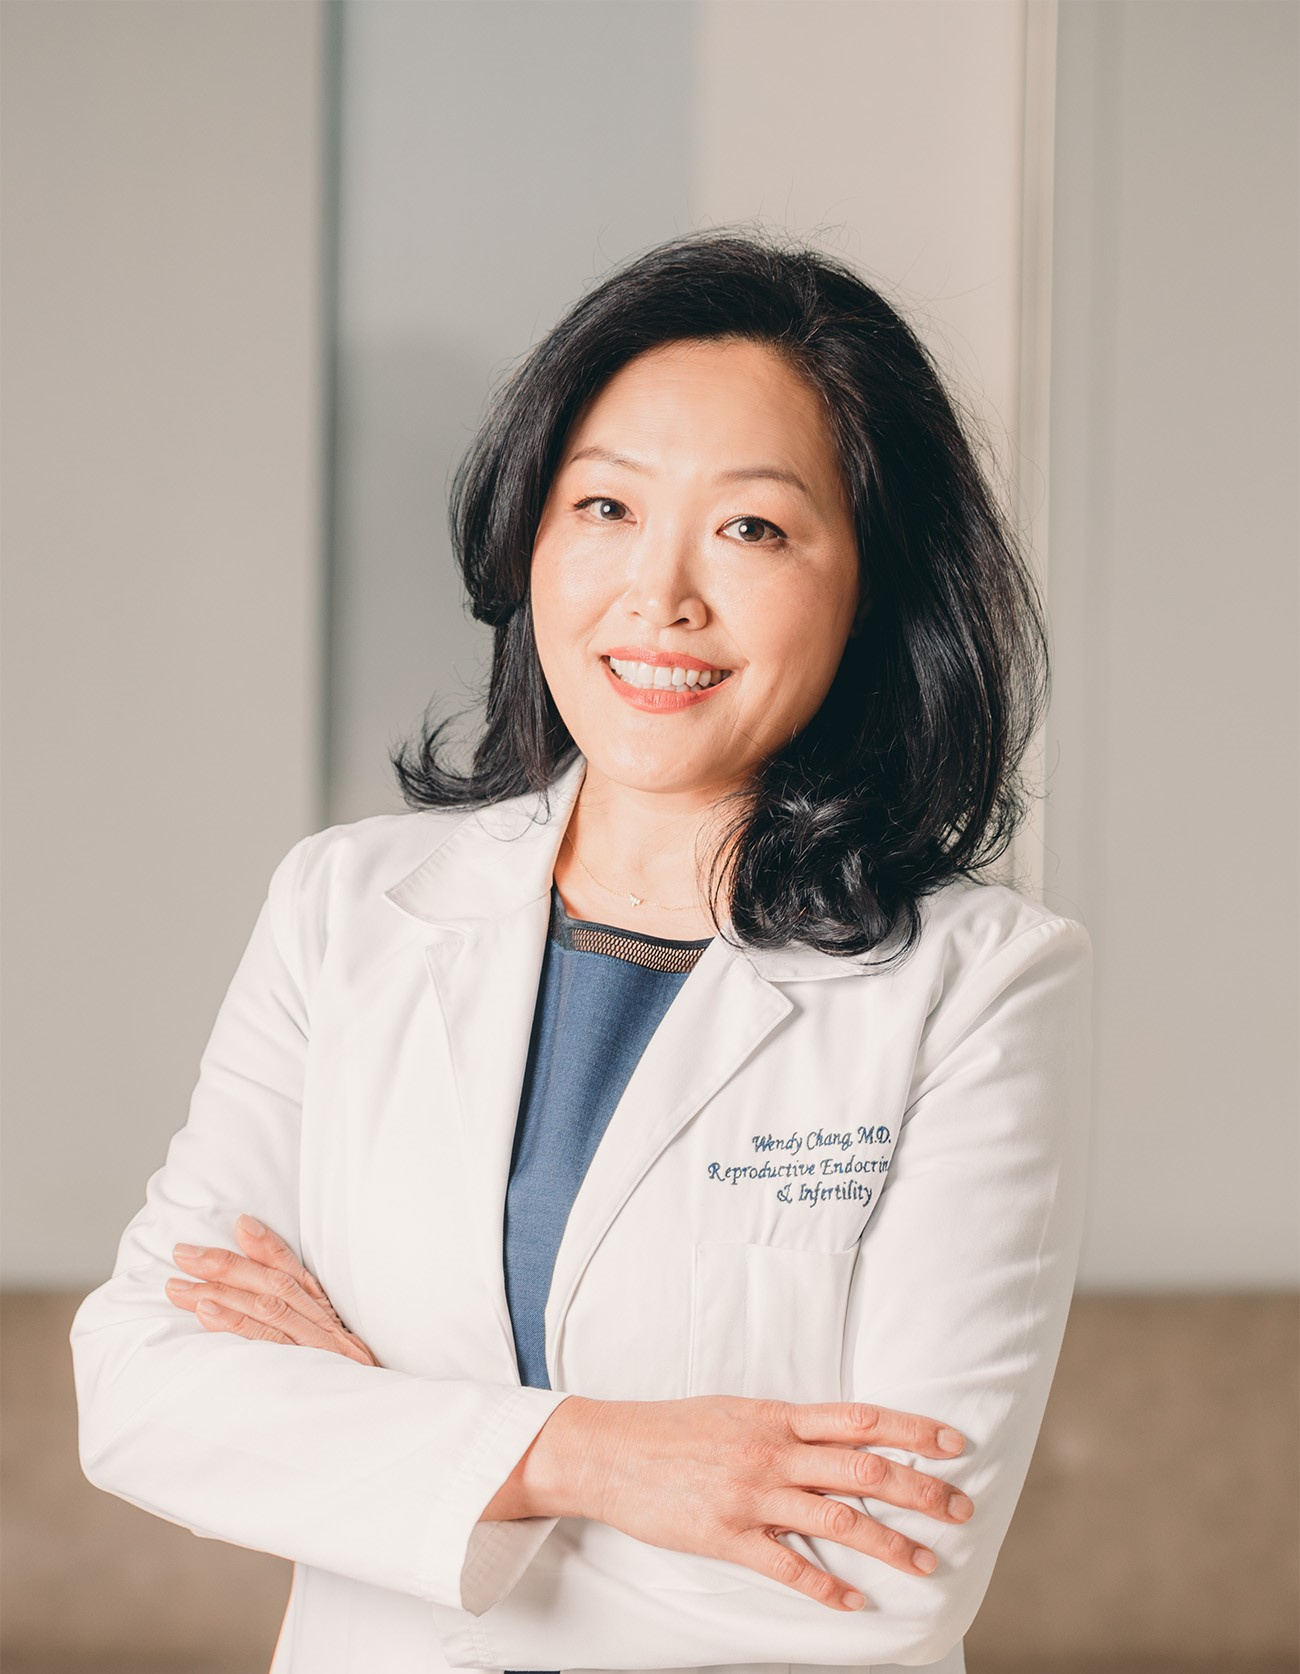 Dr. Wendy Chang